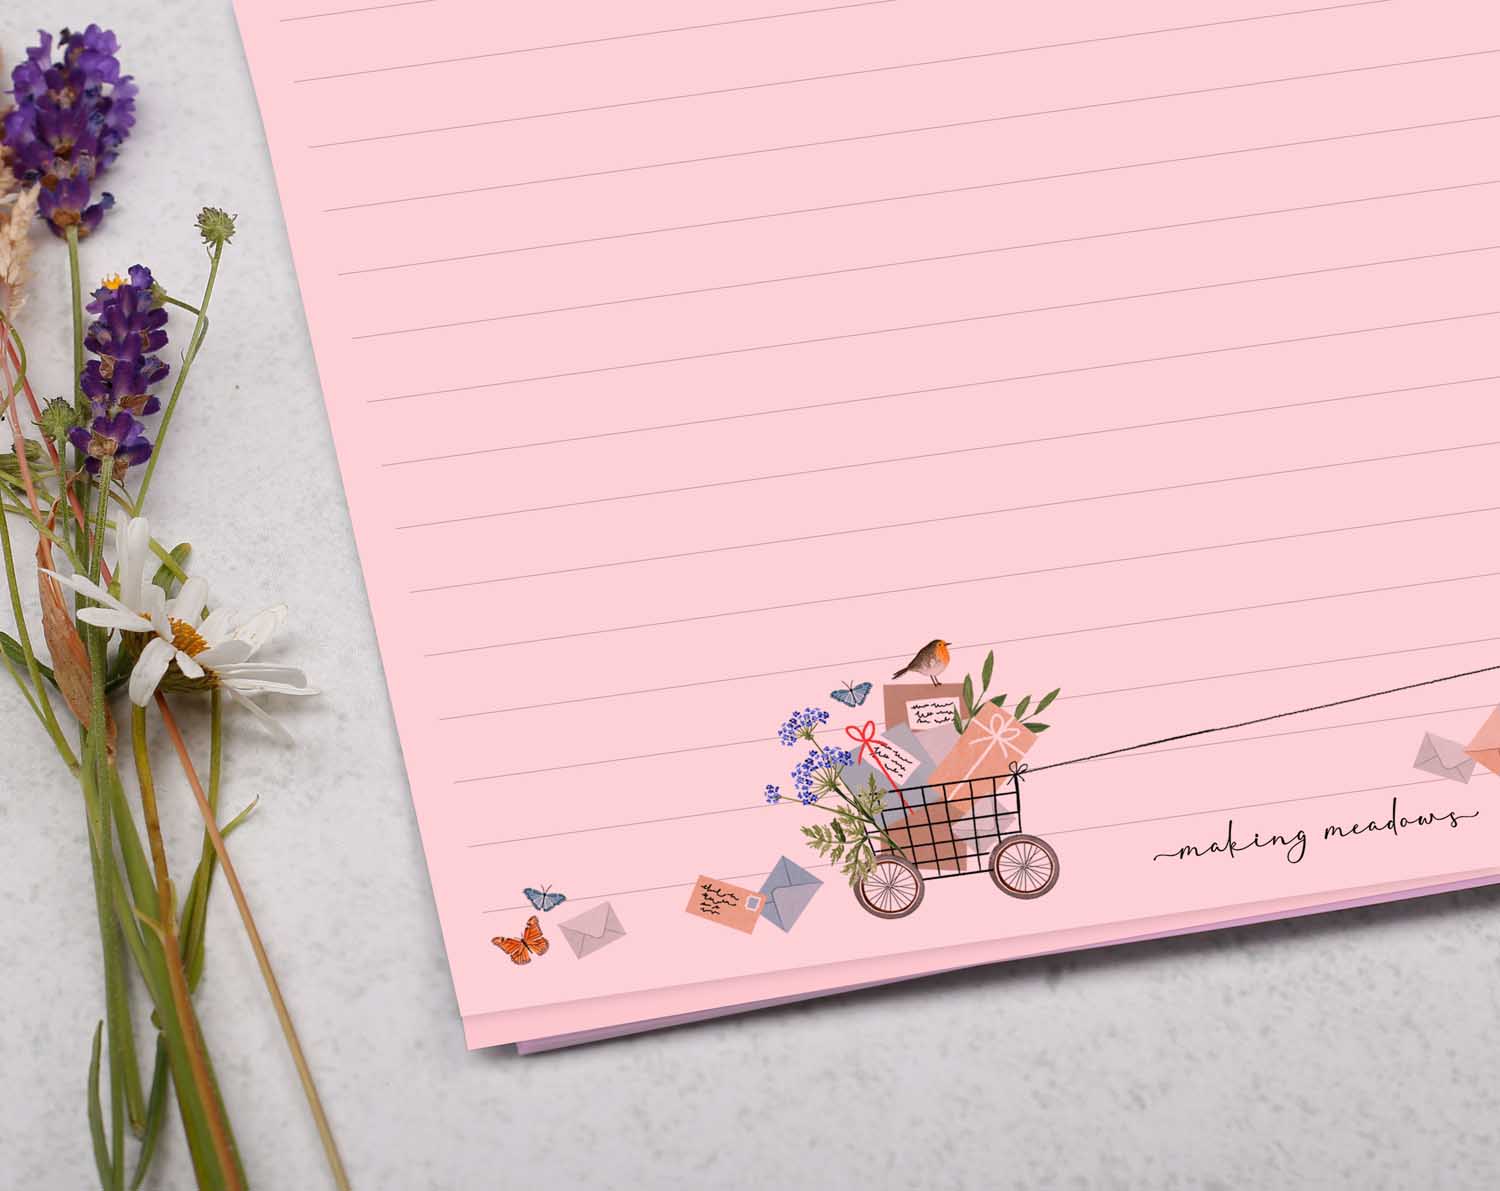 Pink A4 Letter Writing Paper Sheets with Fox On A Bike With Cute Robin watercolour border design.